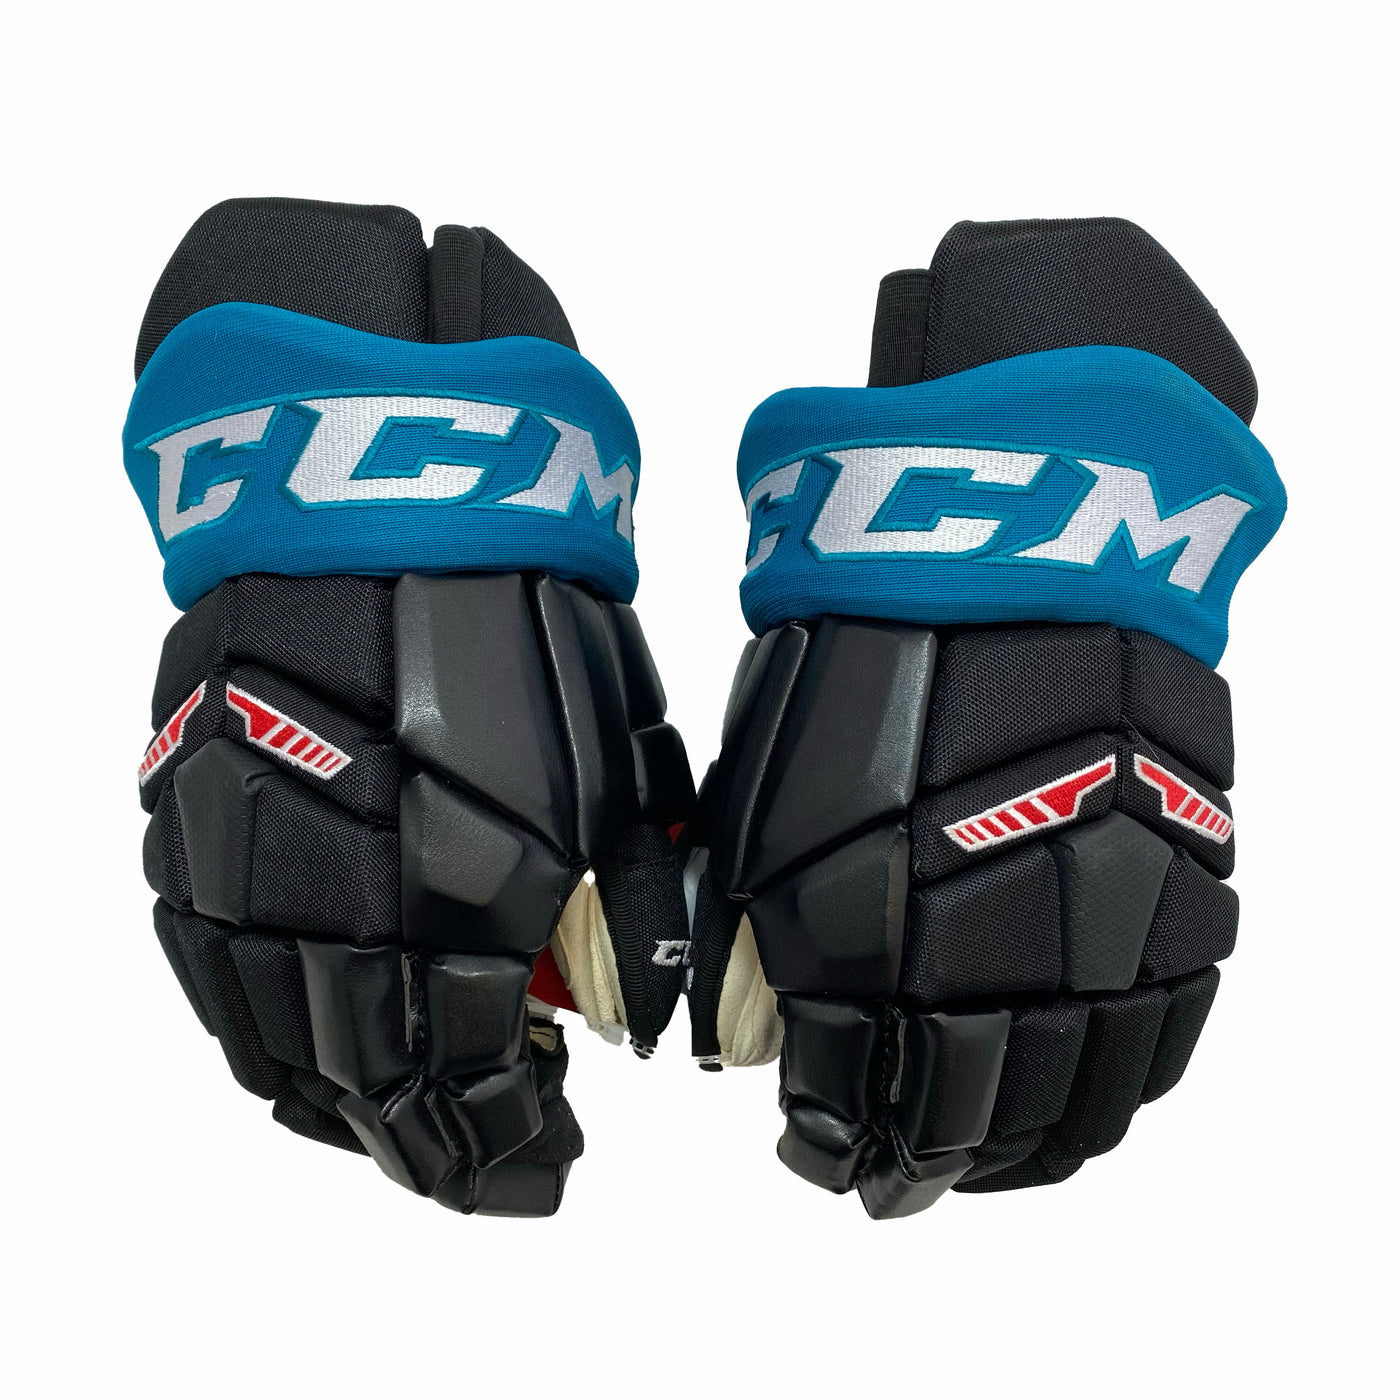 kelowna rockets products for sale